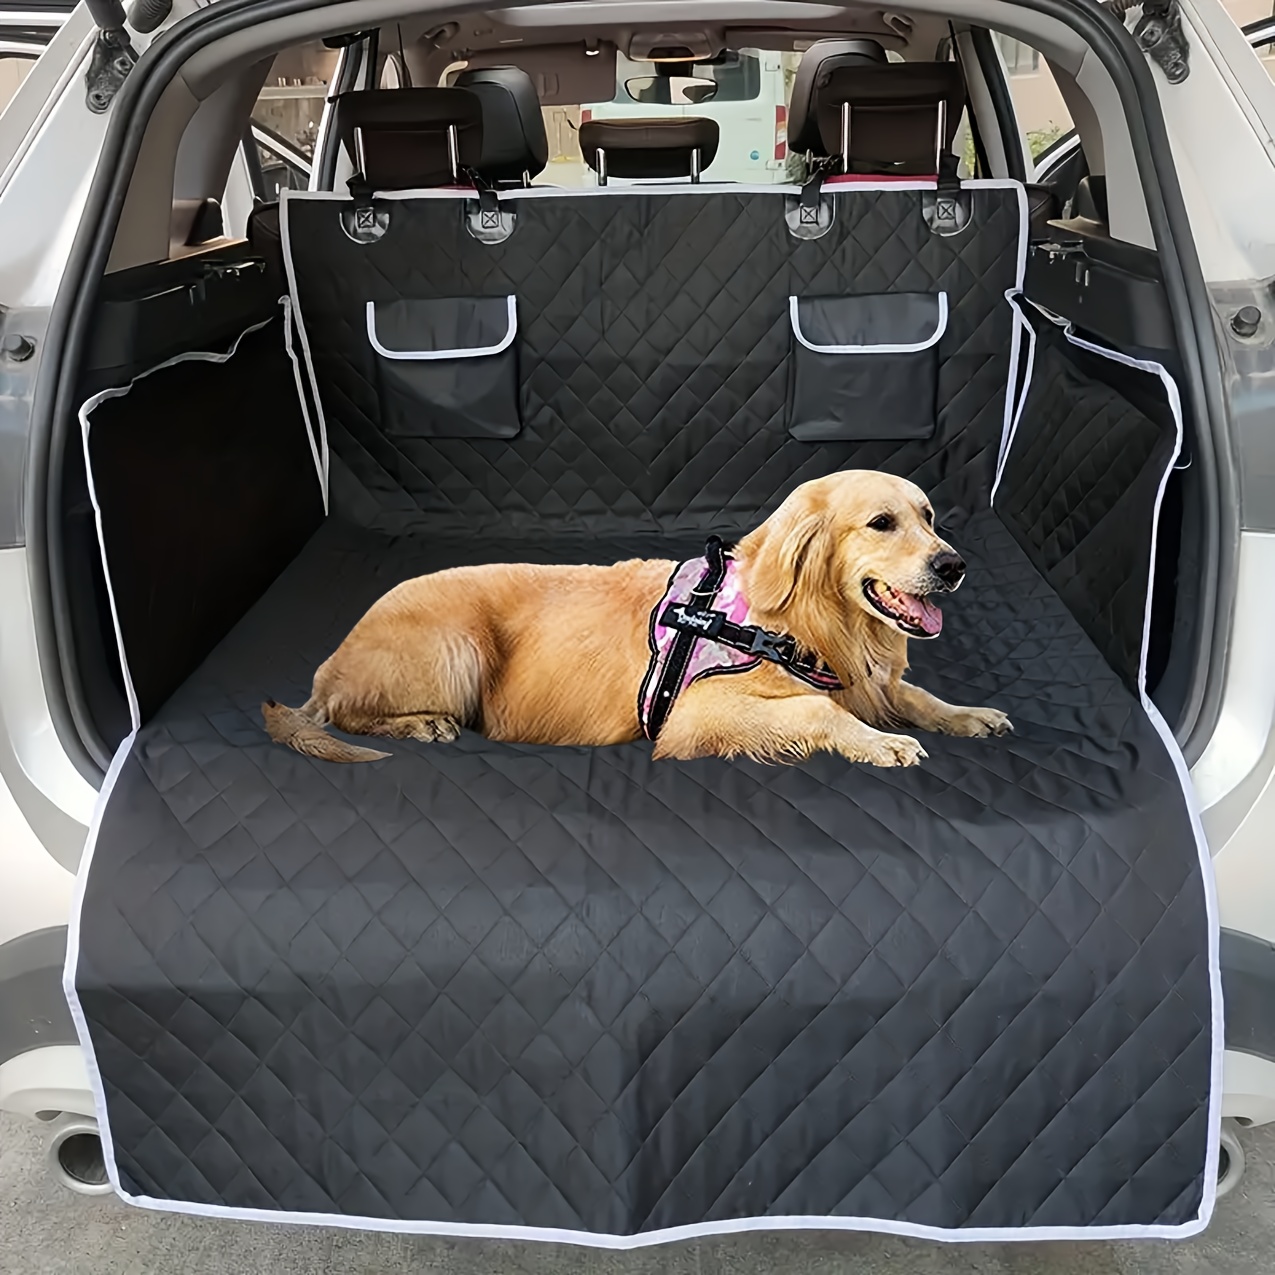 

Non-slip Cargo Liner For Dogs, Waterproof Pet Cargo Cover Dog Seat Mat For Suvs Sedans With Bumper Flap Protector, Large Size Universal Fit, Black